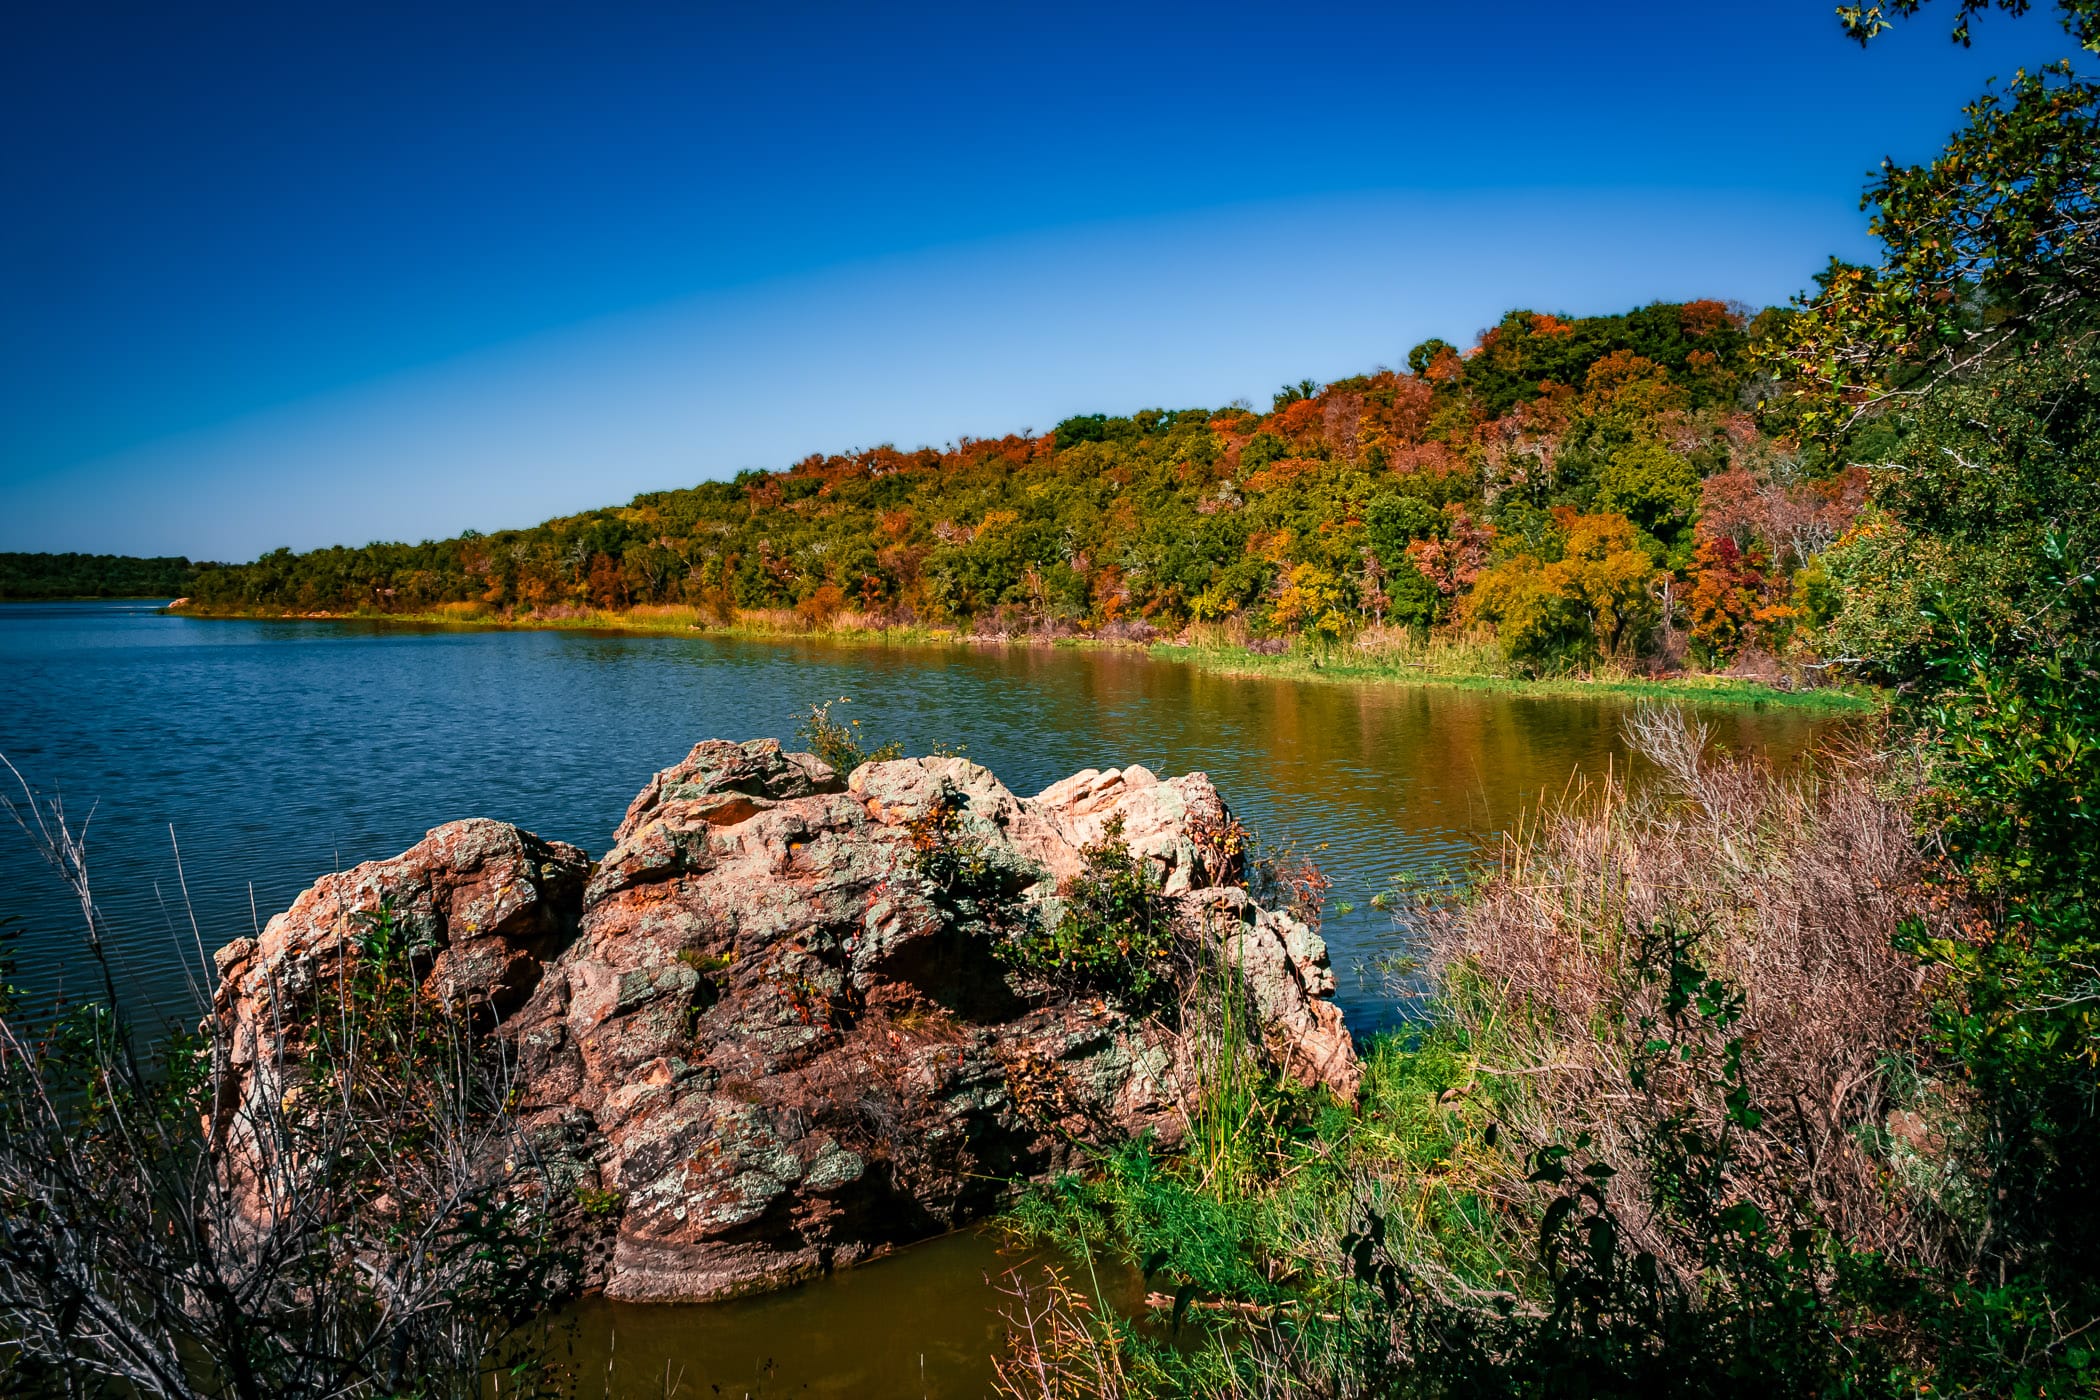 Lake Mineral Wells on a sunny Autumn day in North Central Texas.